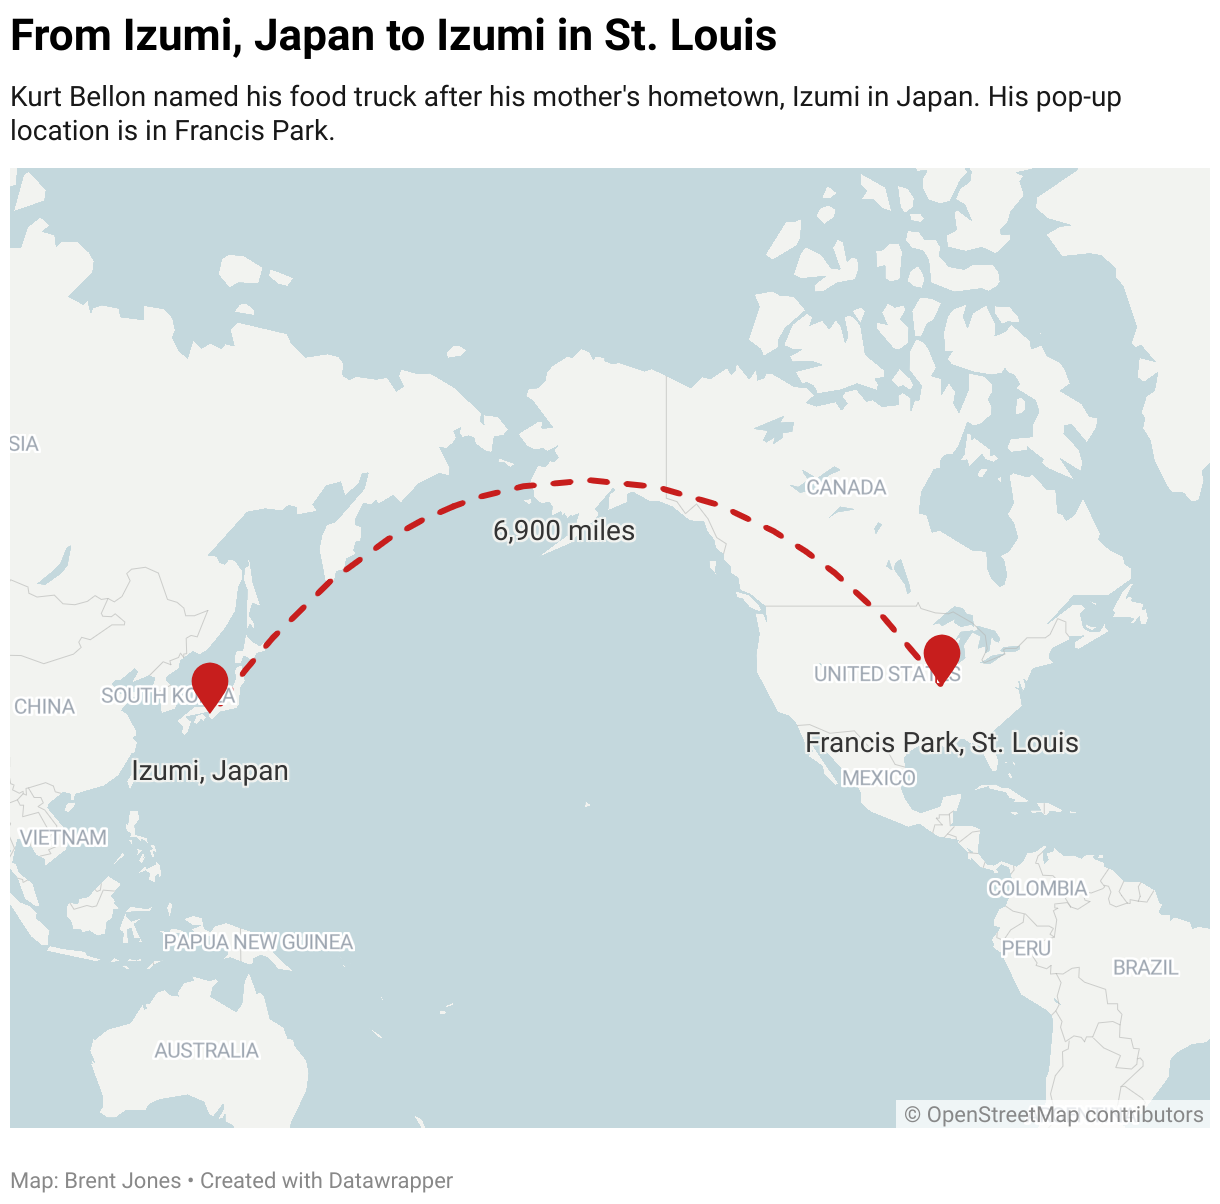 A locator map showing Izumi, Japan and Francis Park, St. Louis, with a dashed line between them.